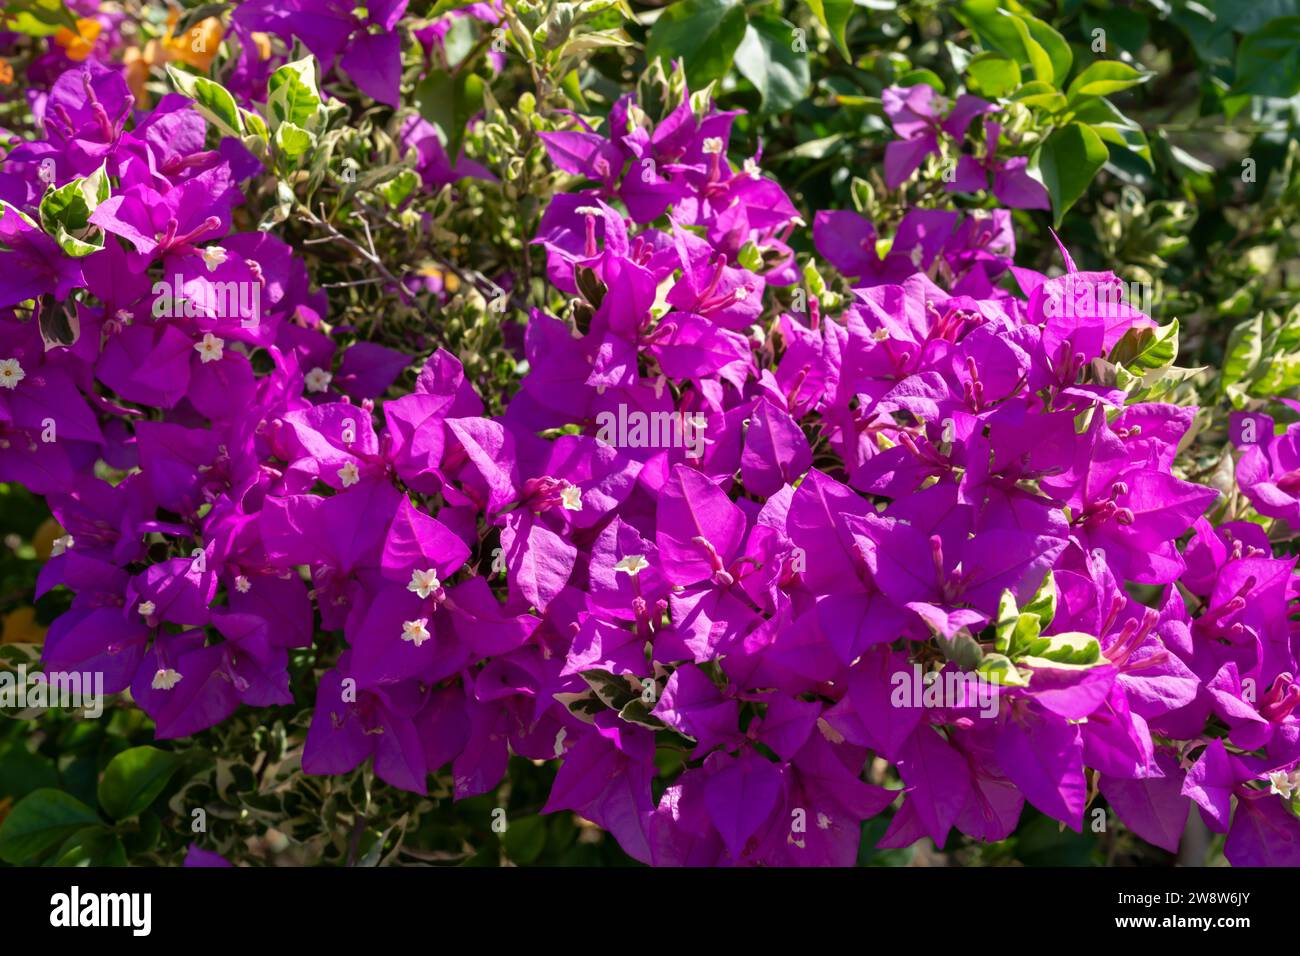 Bougainvillea is a popular tropical flowering plant in the garden. Stock Photo